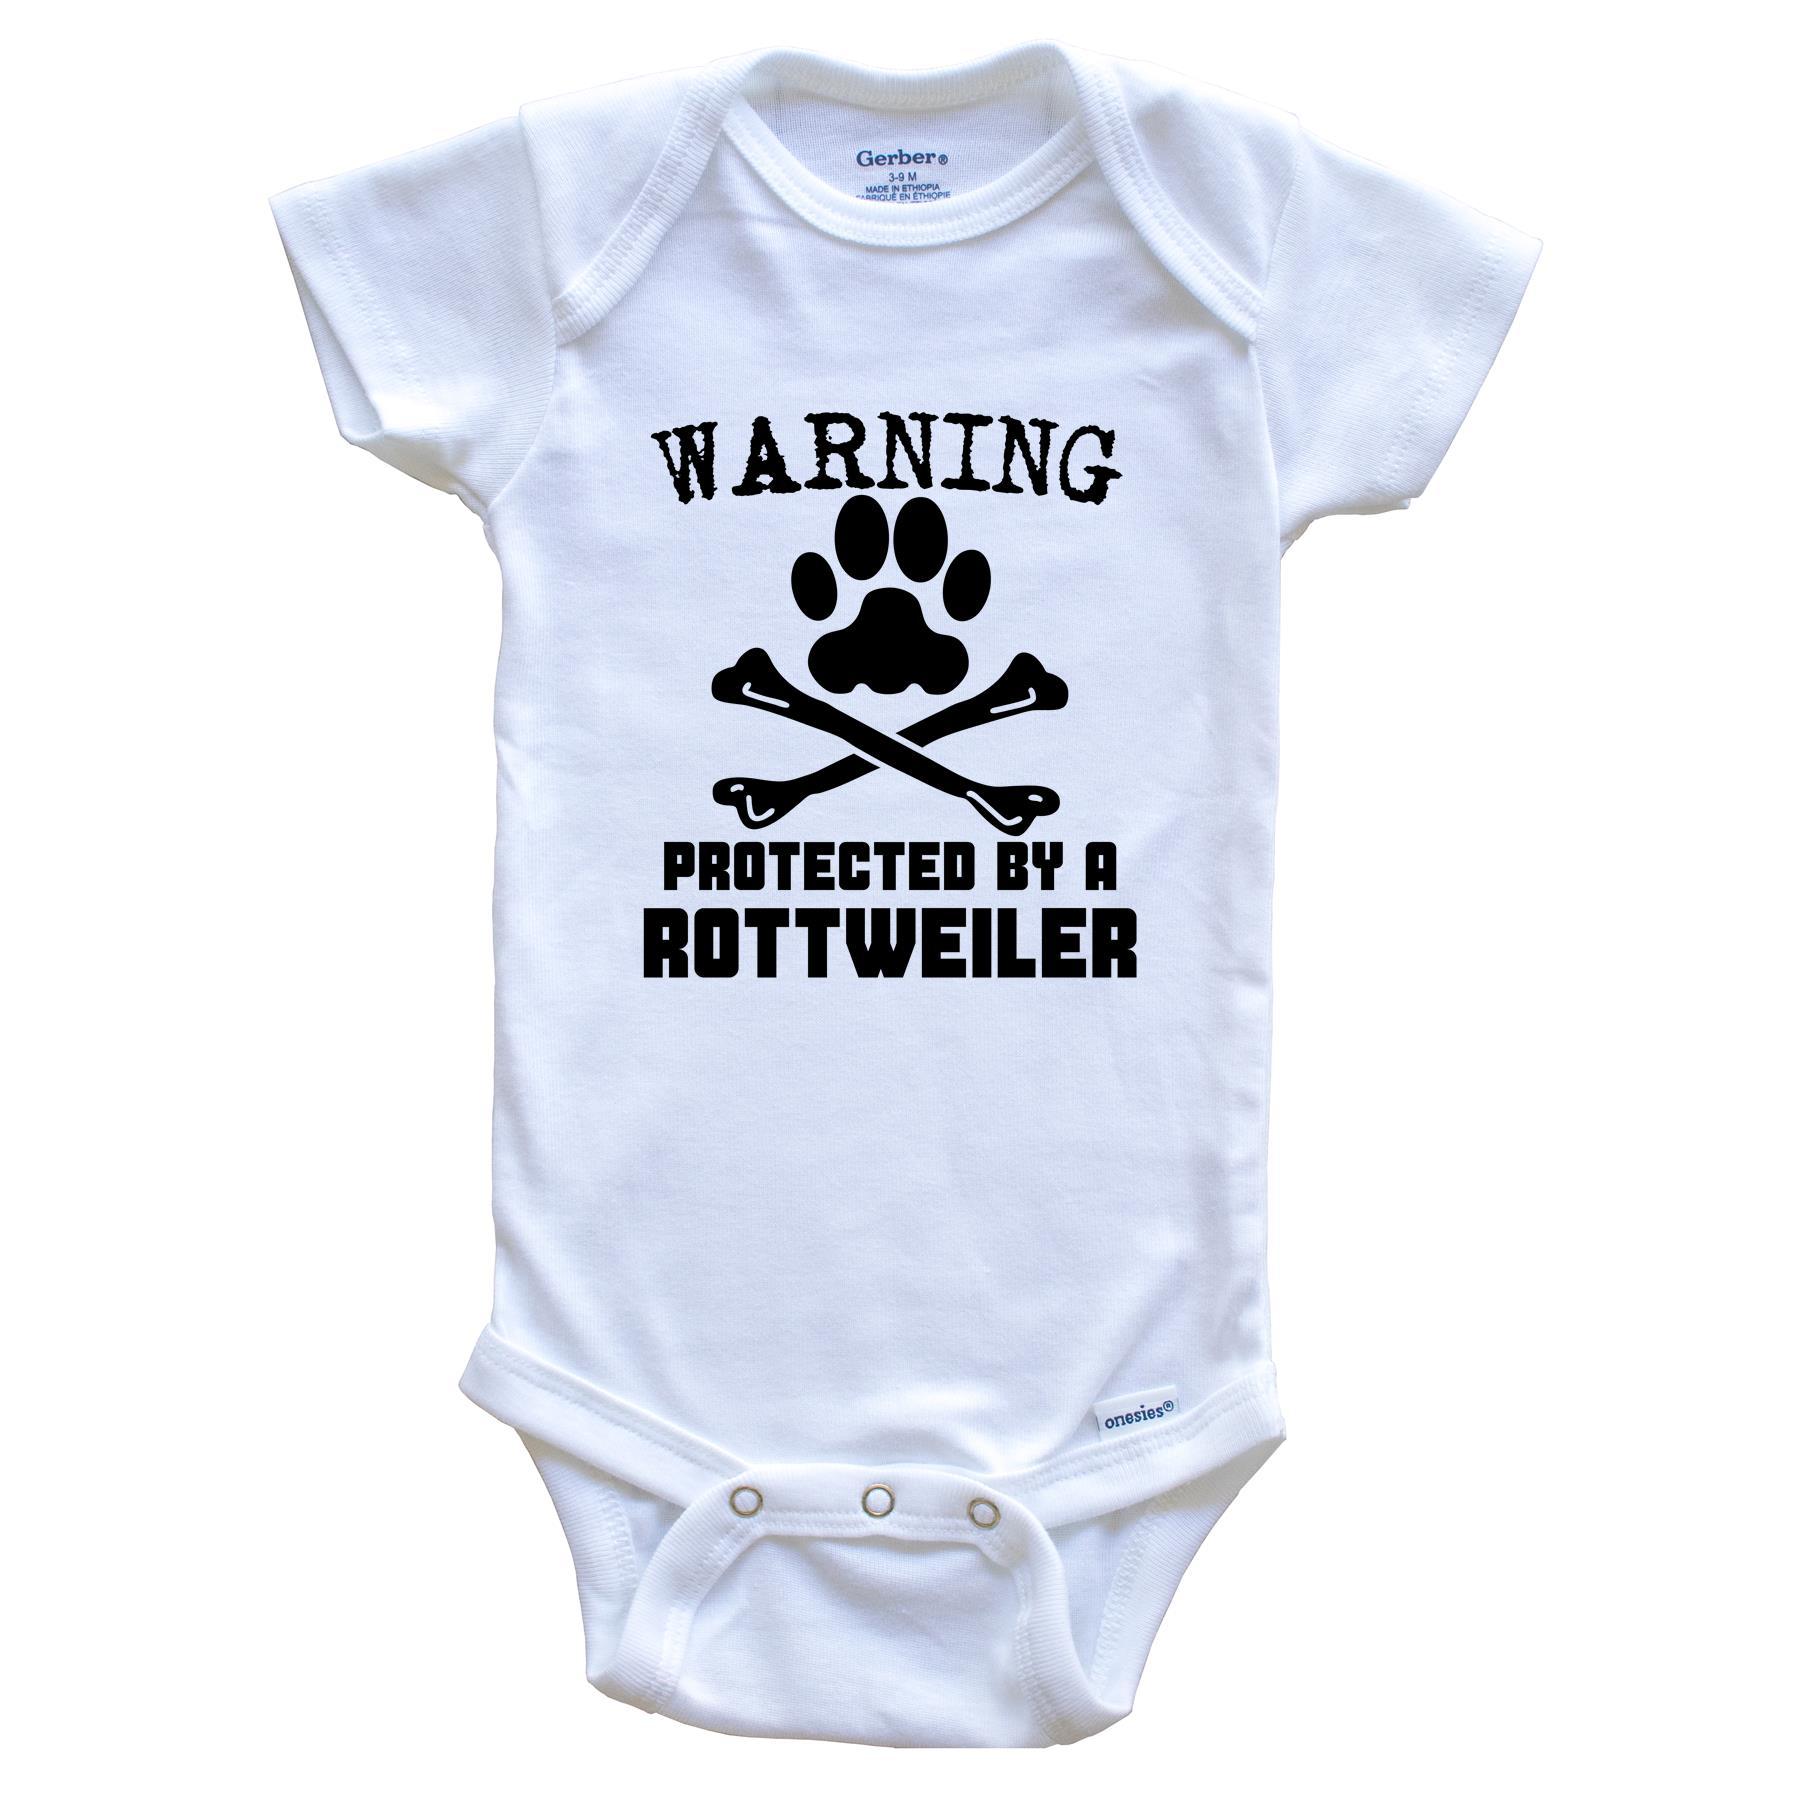 Warning Protected By A Rottweiler Funny Baby Onesie